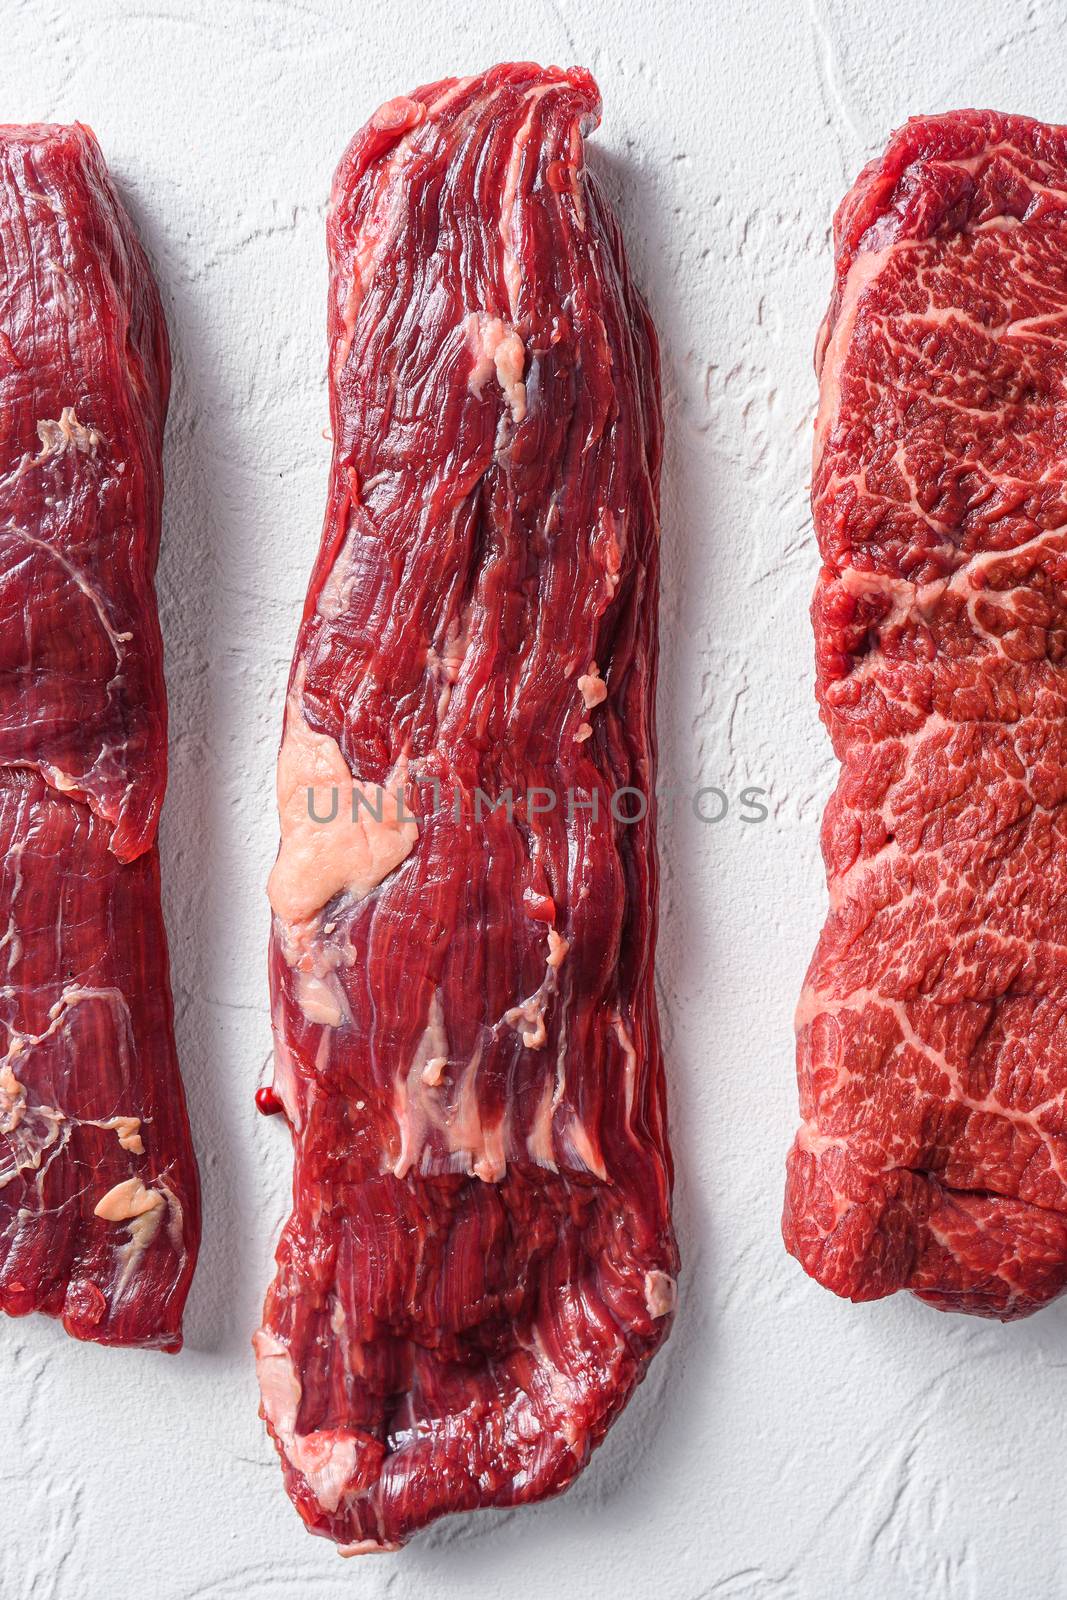 Raw machete steak for BBQ cut organic meat cut top view close up over white concrete background vertical. by Ilianesolenyi